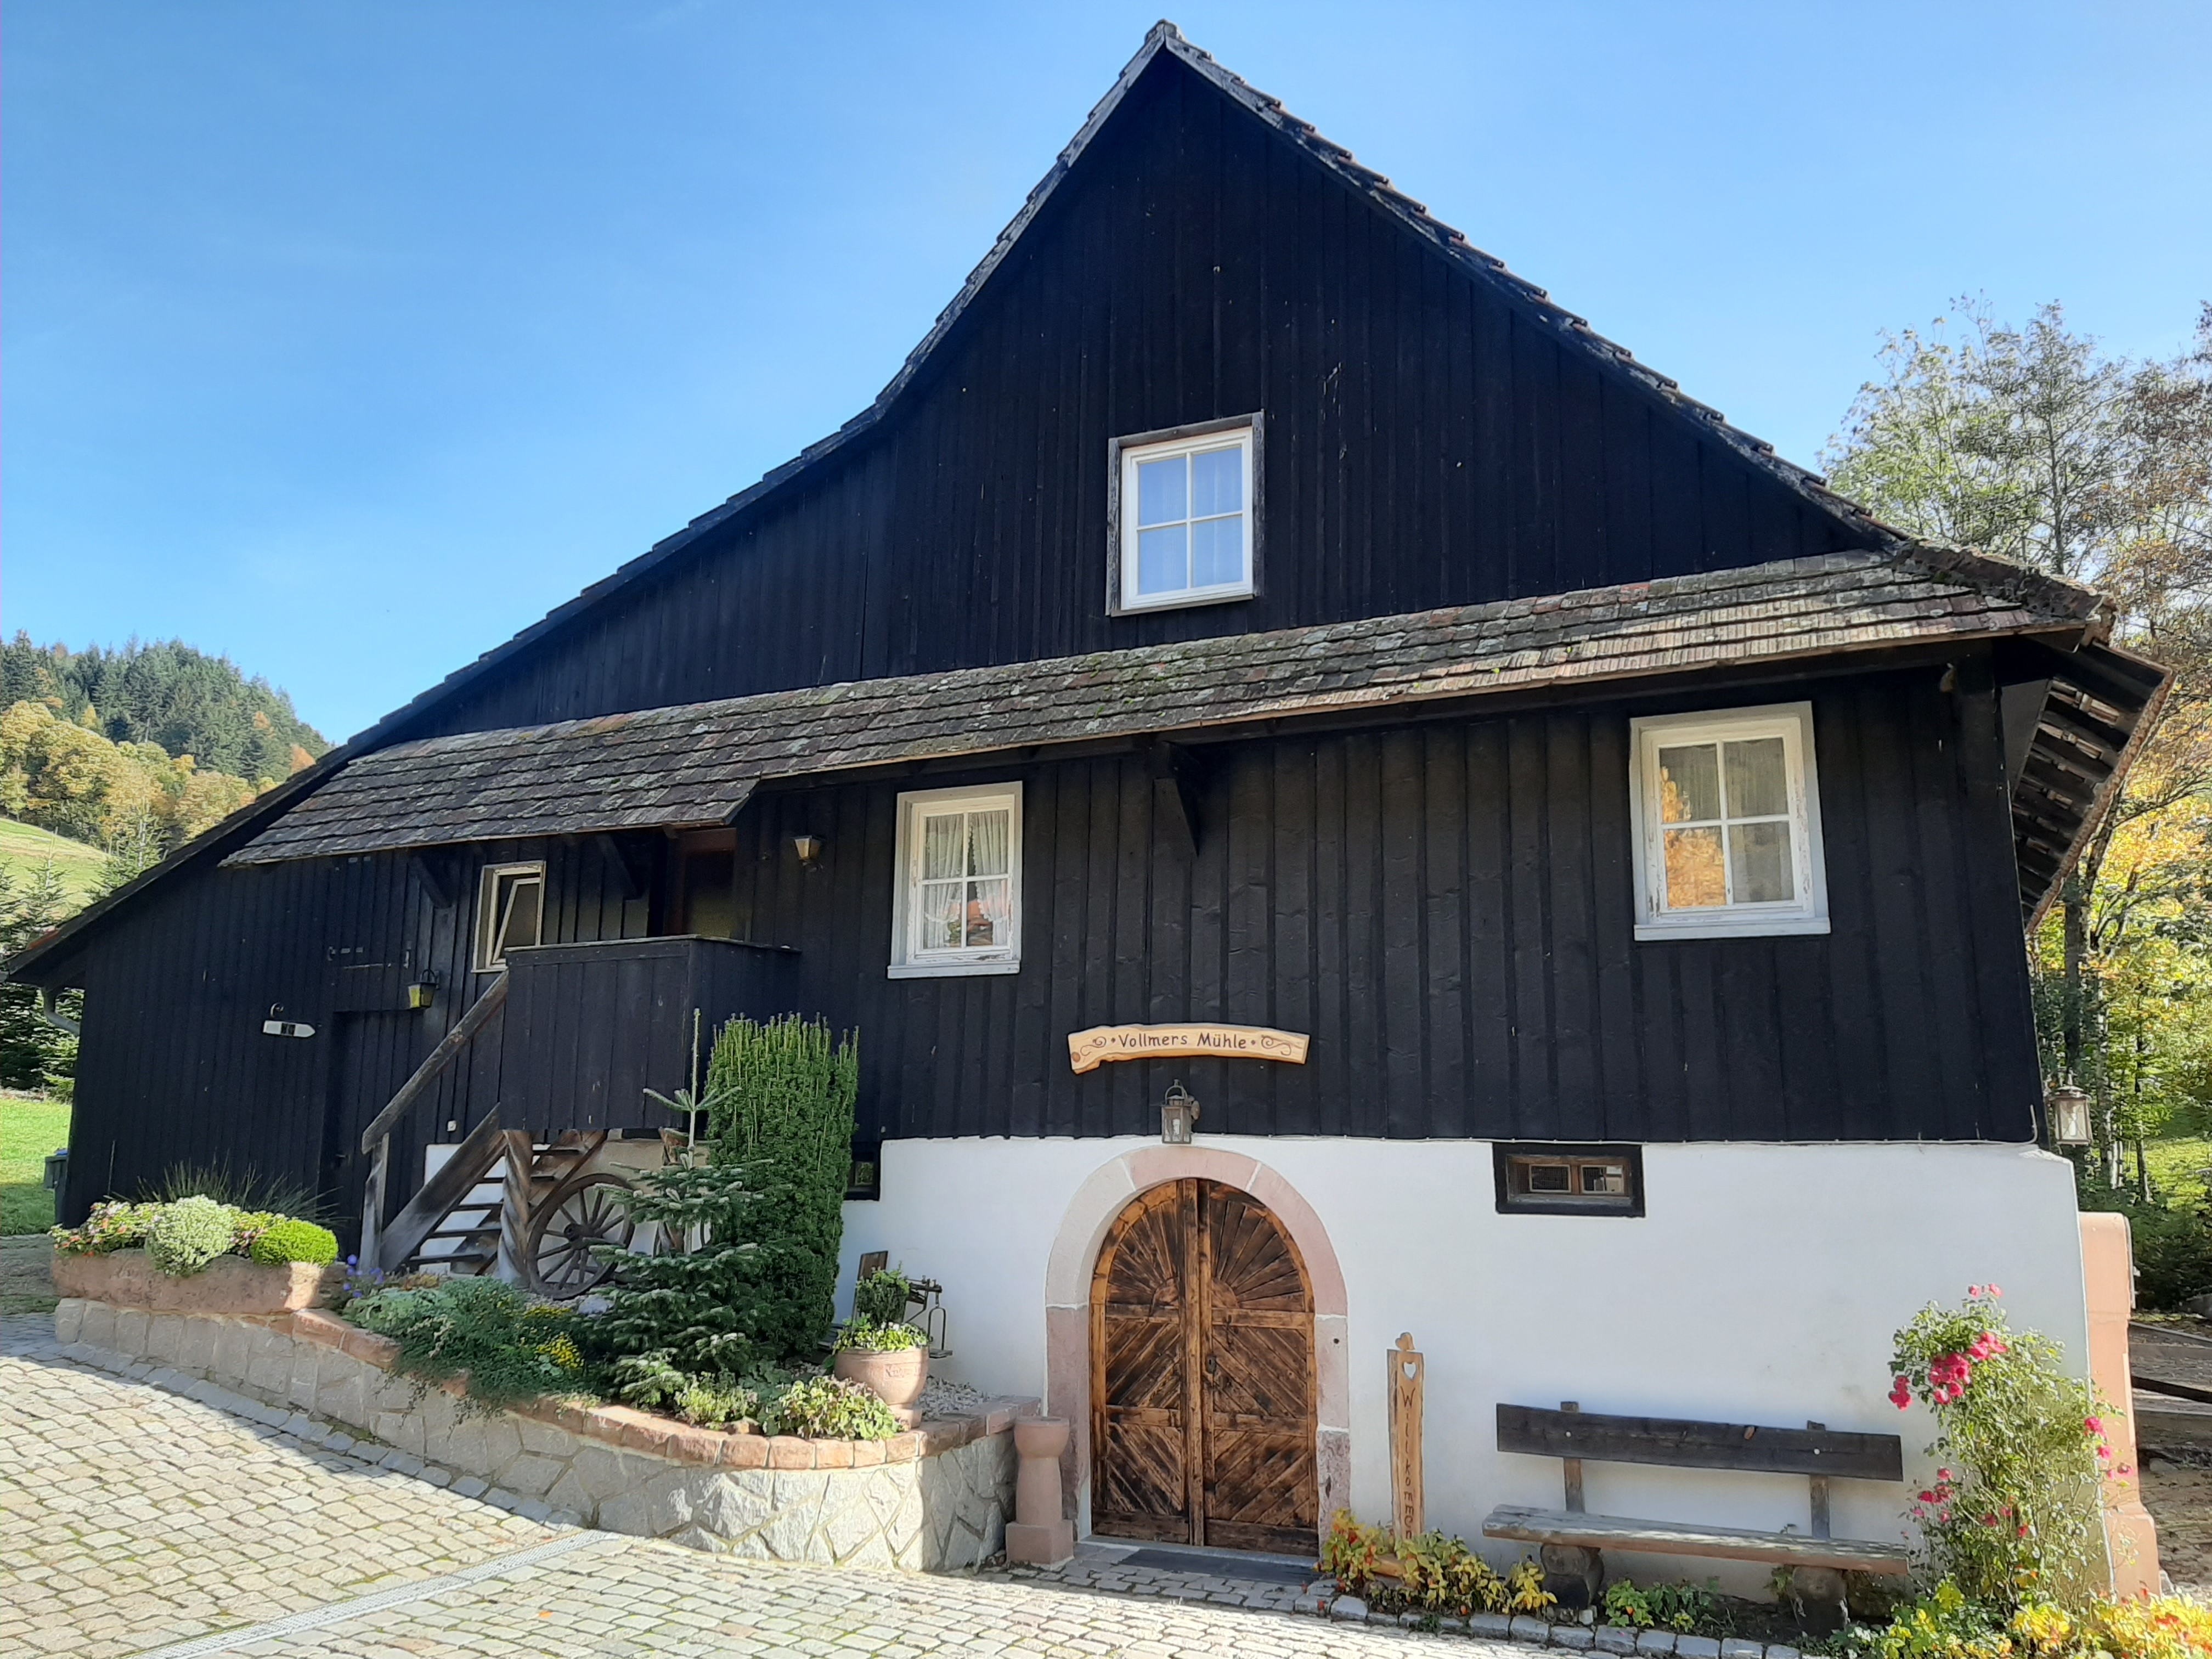 Vollmers Mühle in Seebach